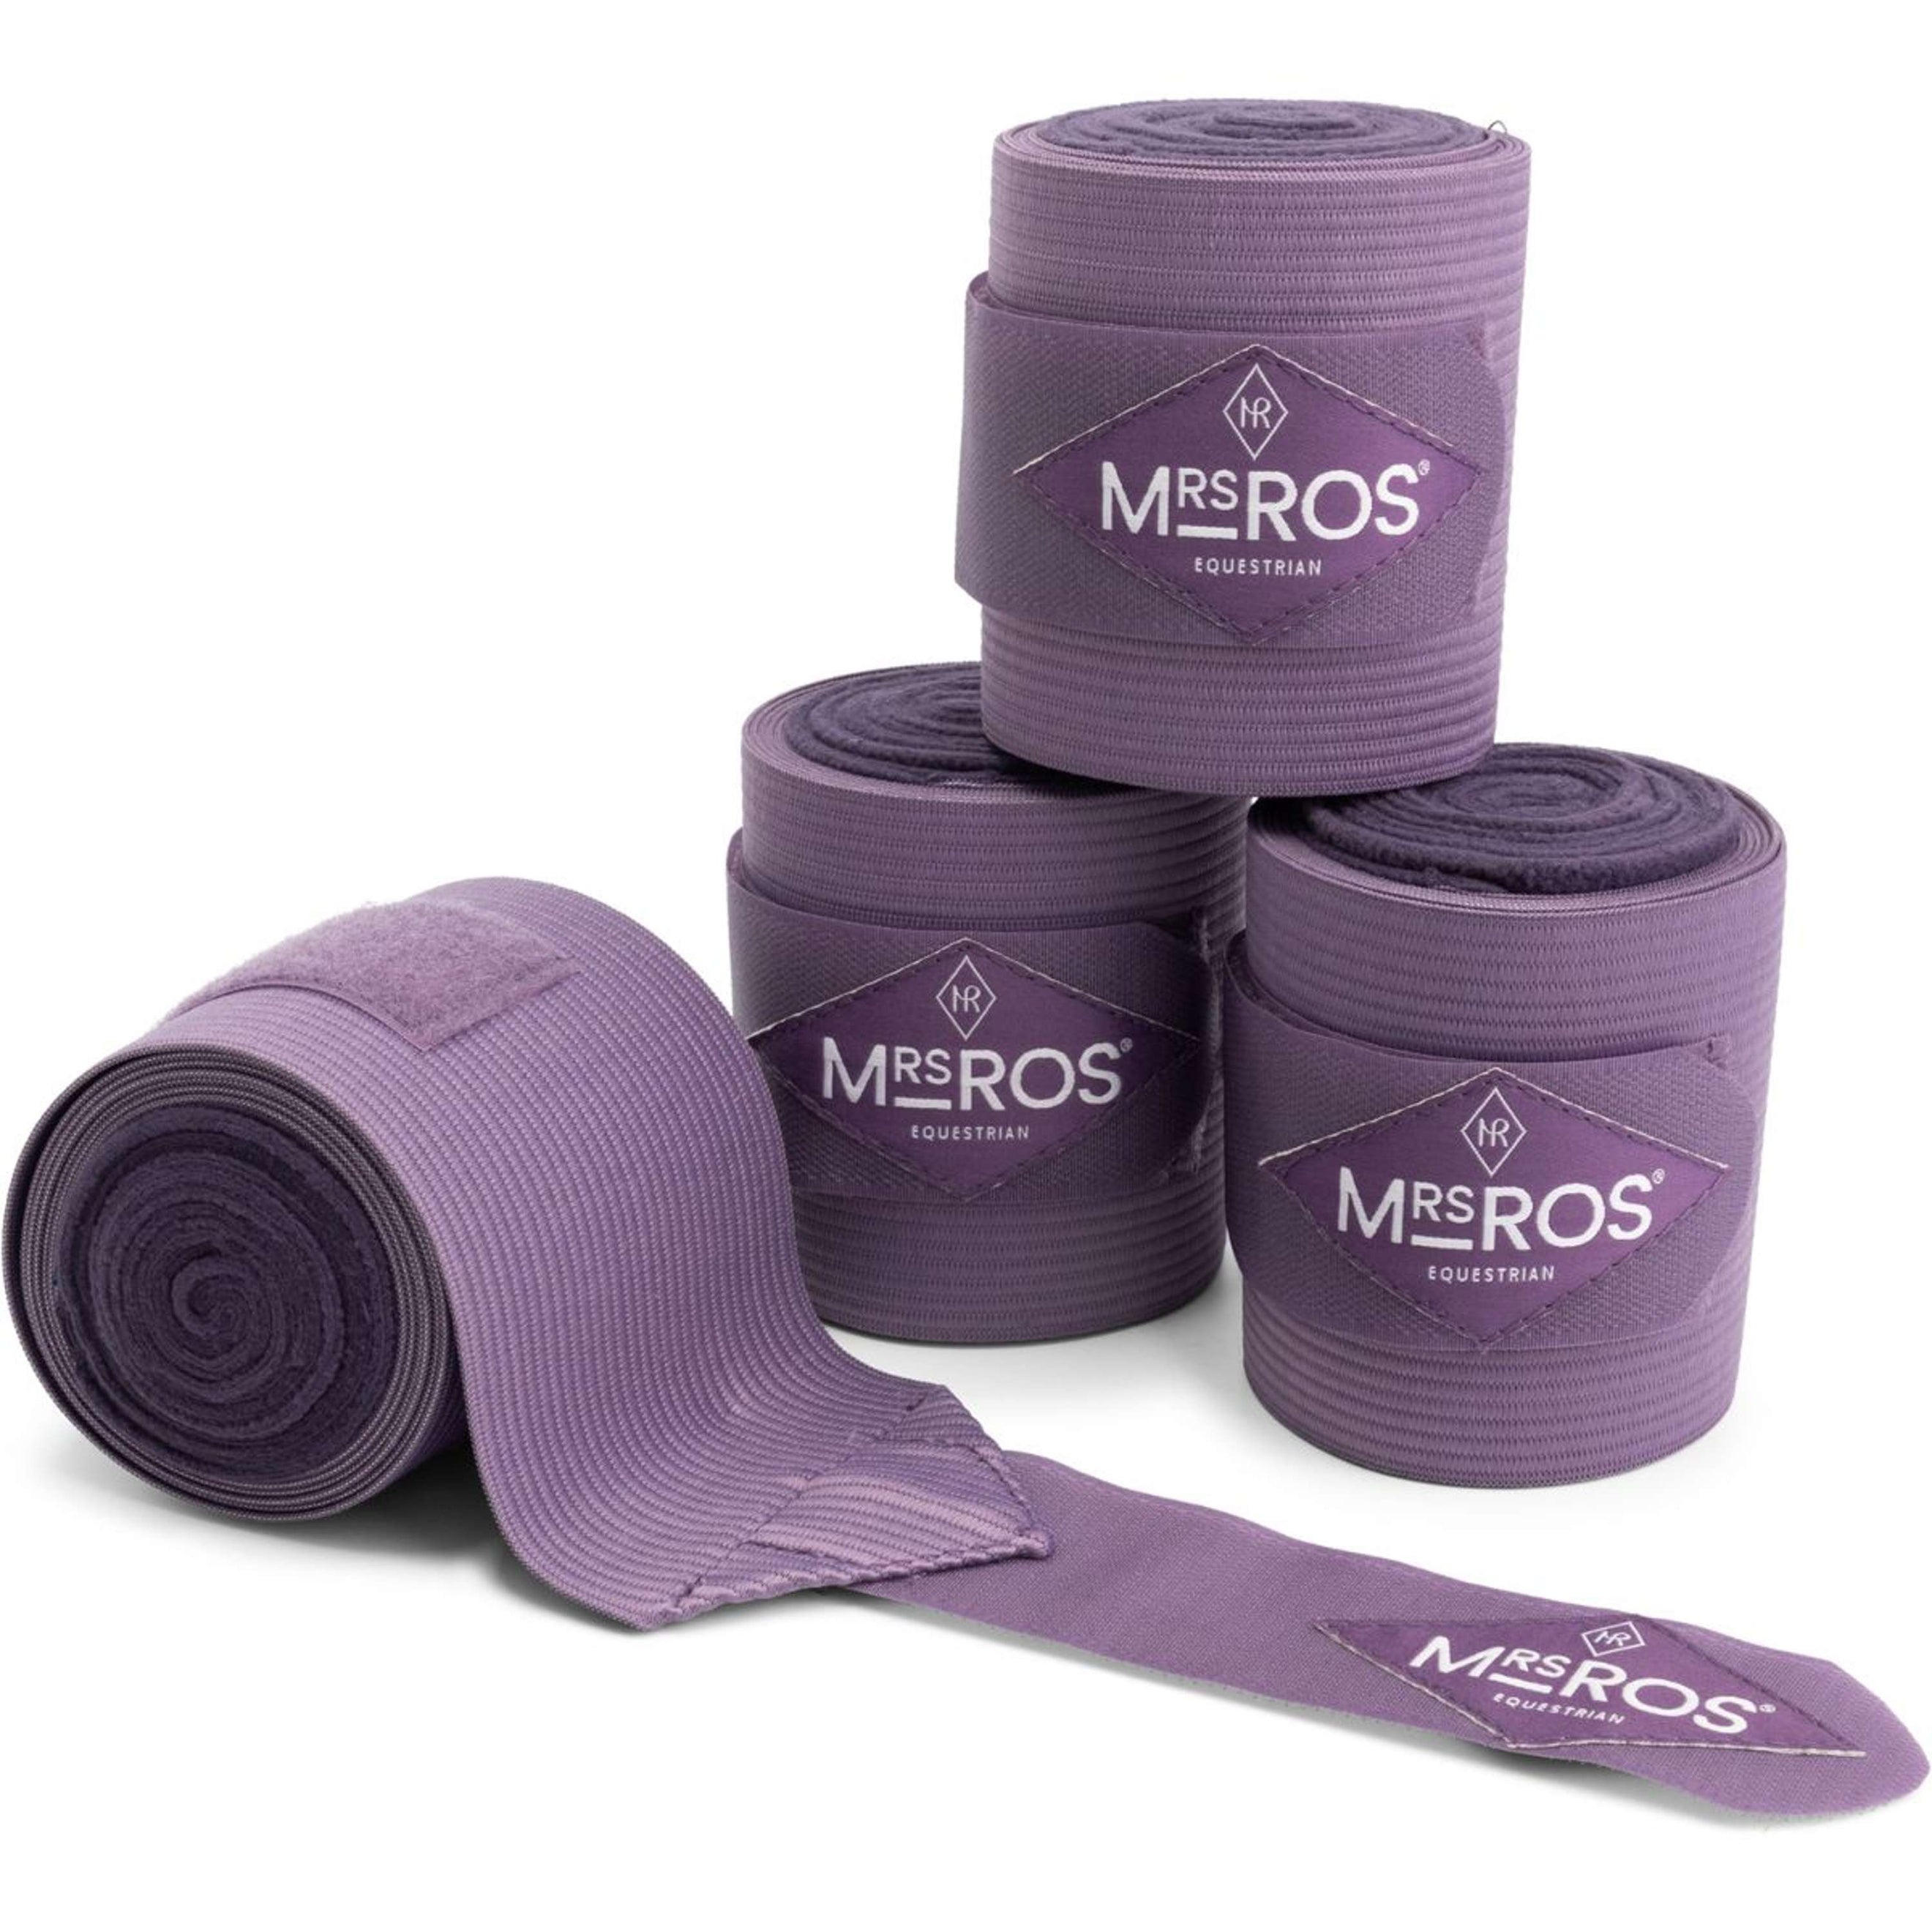 Mrs. Ros Bandages Technical Lilac Breeze